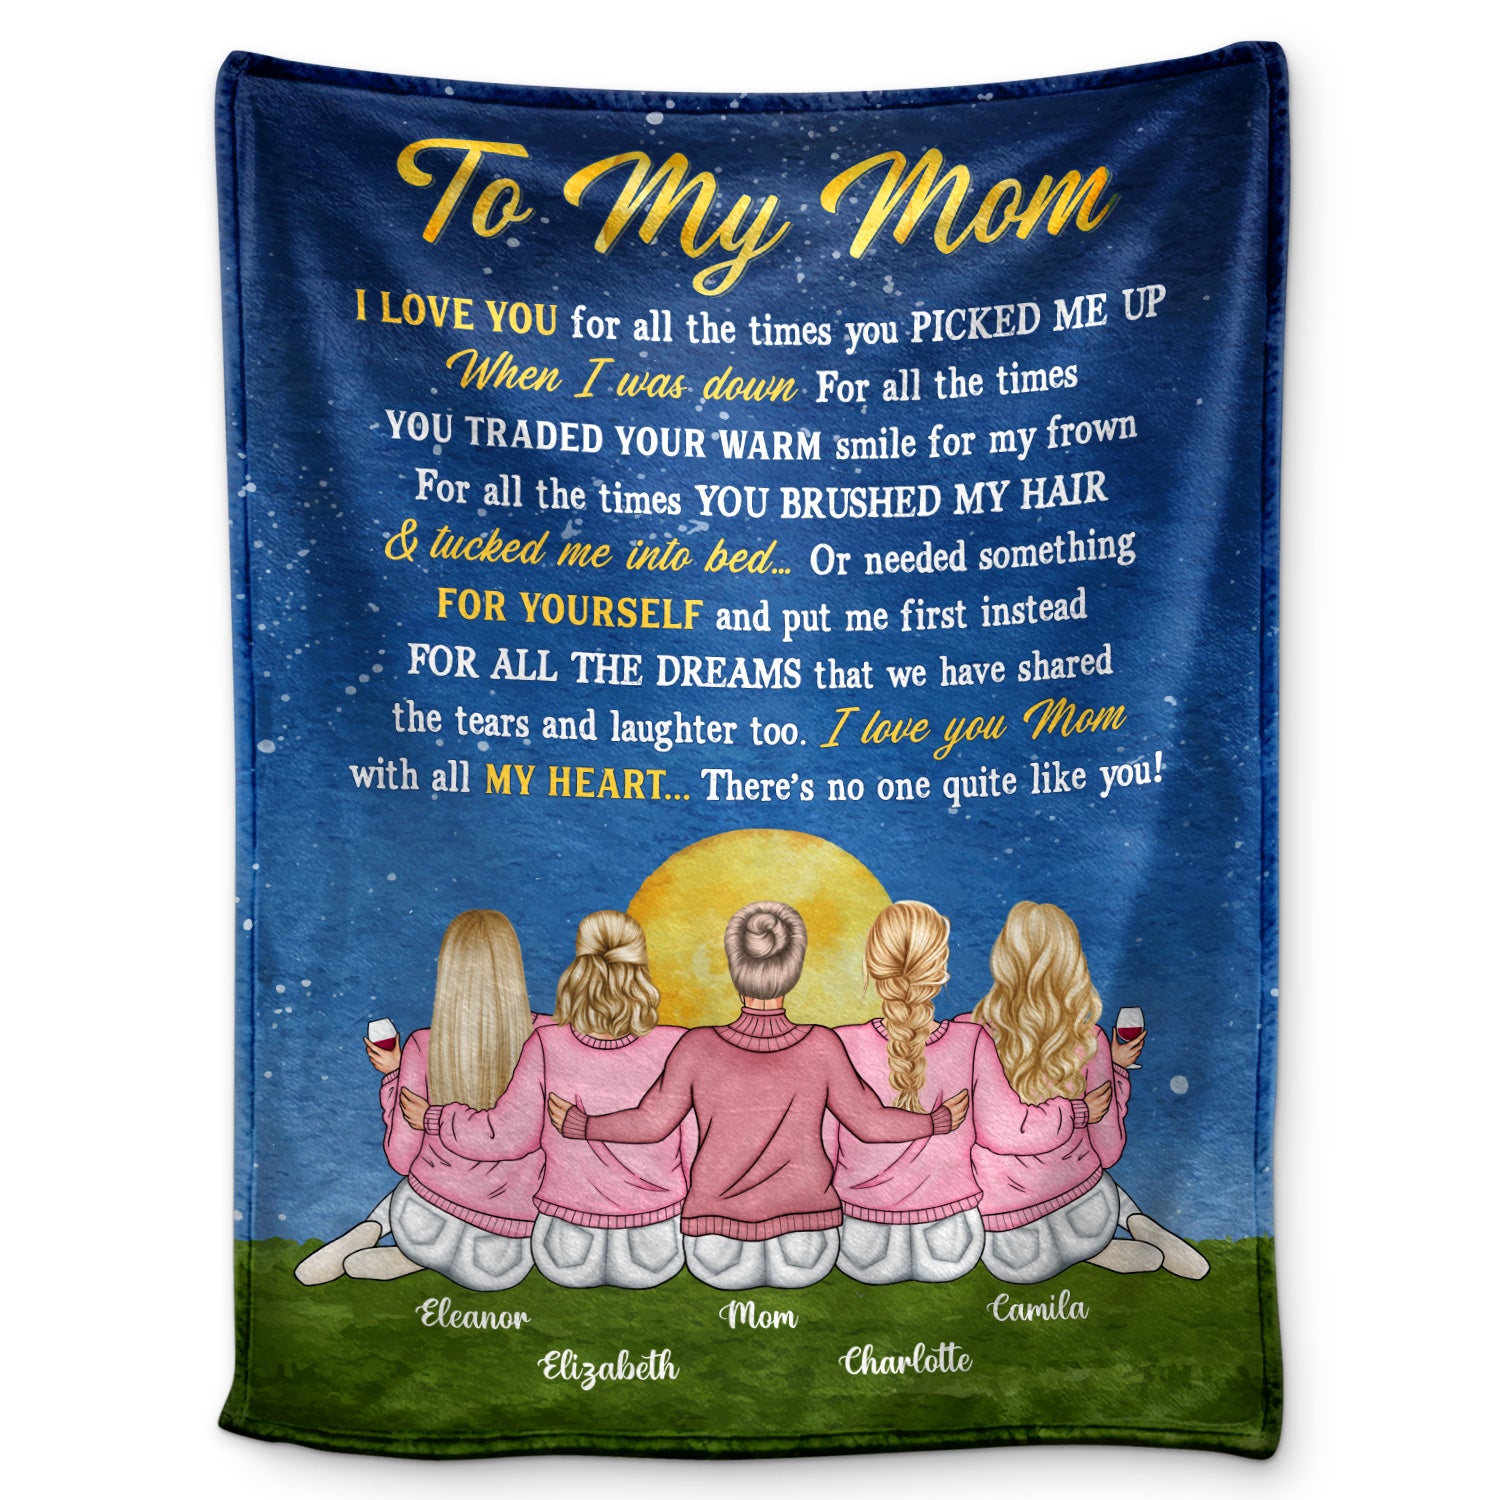 I Love You For All The Times - Gift For Mother - Personalized Custom Fleece Blanket